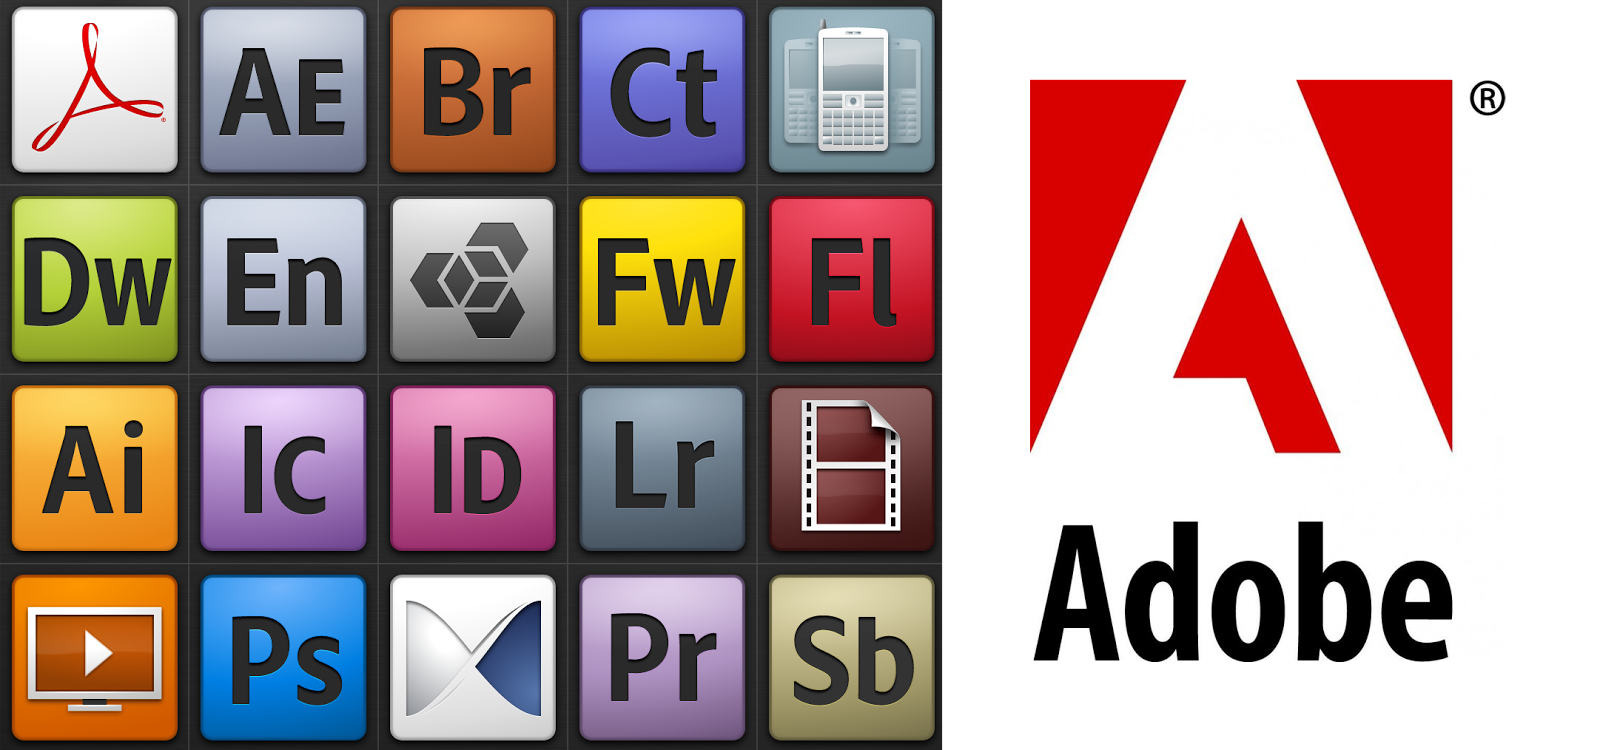 how to find your adobe flash cs6 key